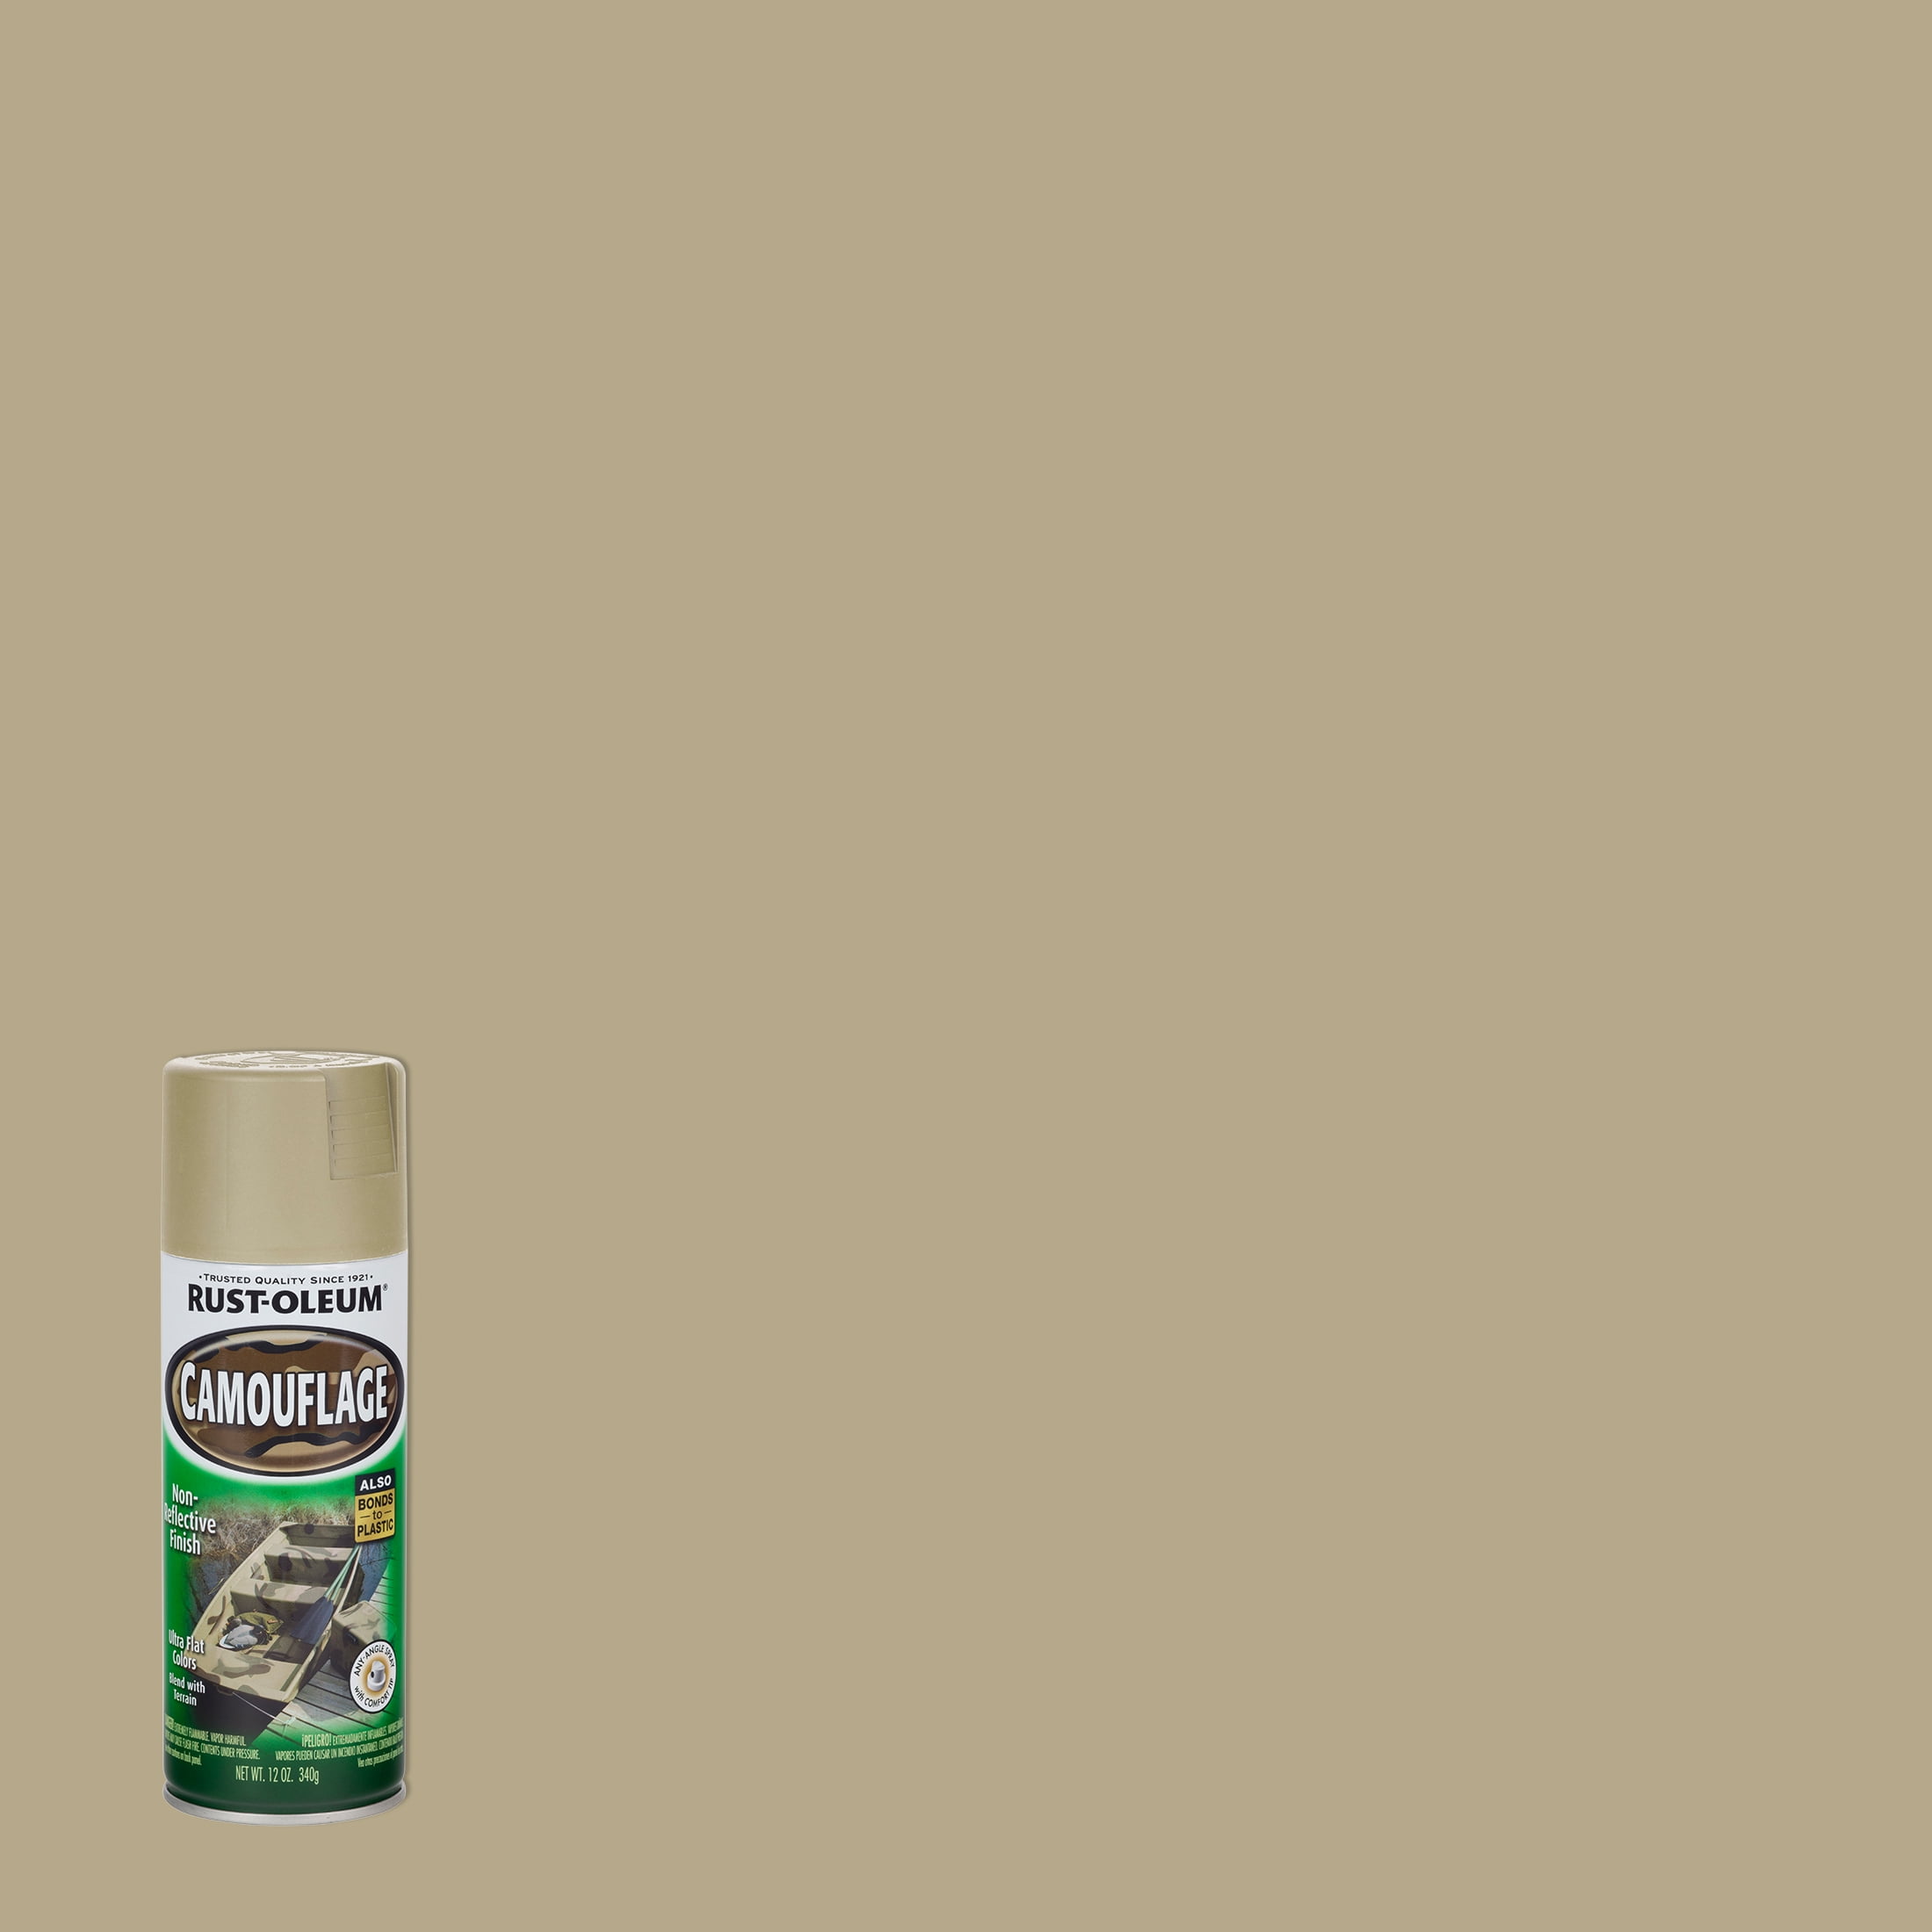 Sand, Rust-Oleum Camouflage 2X Ultra Cover Spray Paint-339004, 12 oz